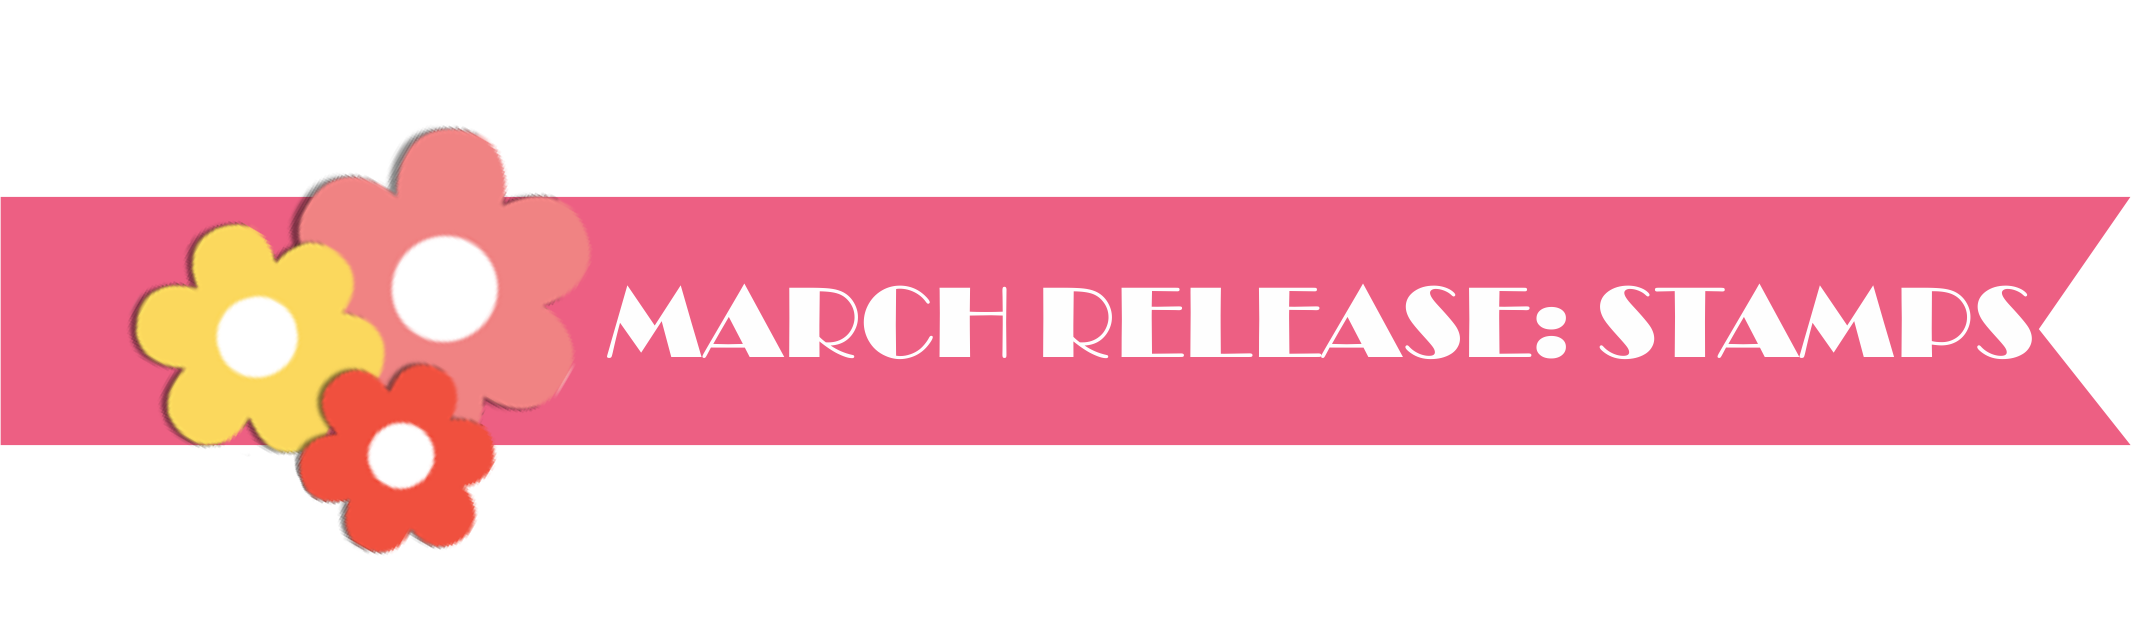 MARCH RELEASED STAMP.png